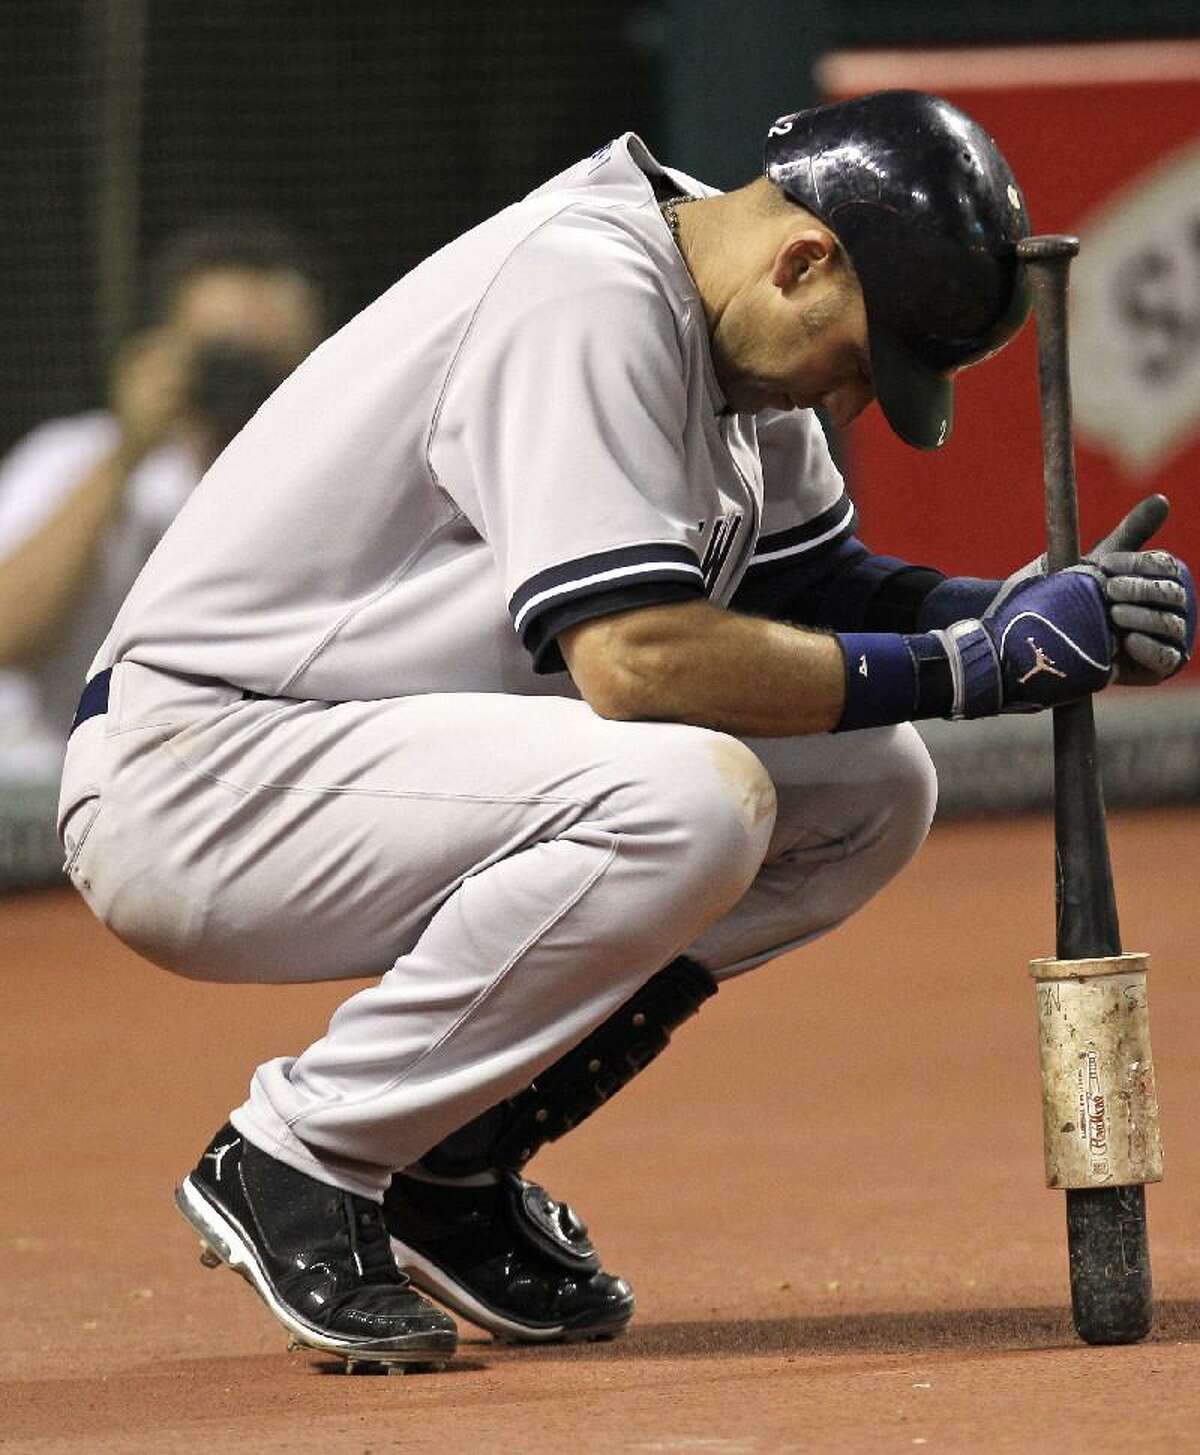 ASSOCIATED PRESS New York Yankees shortstop Derek Jeter waits to bat in the ninth inning of Wednesday's game against the Cleveland Indians in Cleveland. Jeter did not get a chance to bat in the ninth. Jeter ended the game three away from 3,000 for his career. The Indians won 5-3.